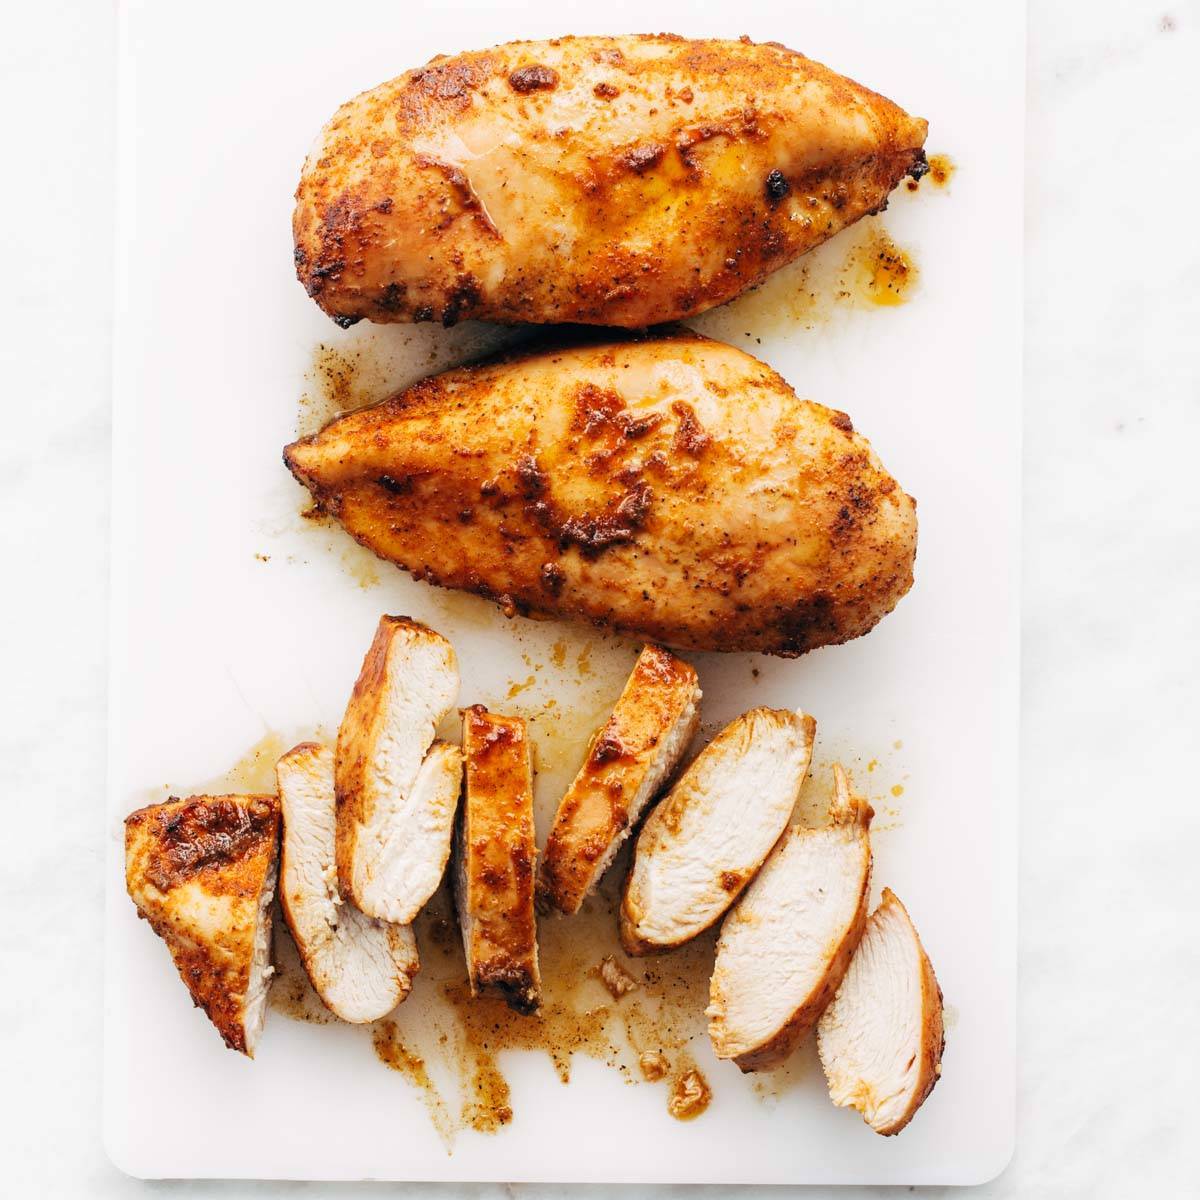 Baked chicken breasts sliced on a cutting board.